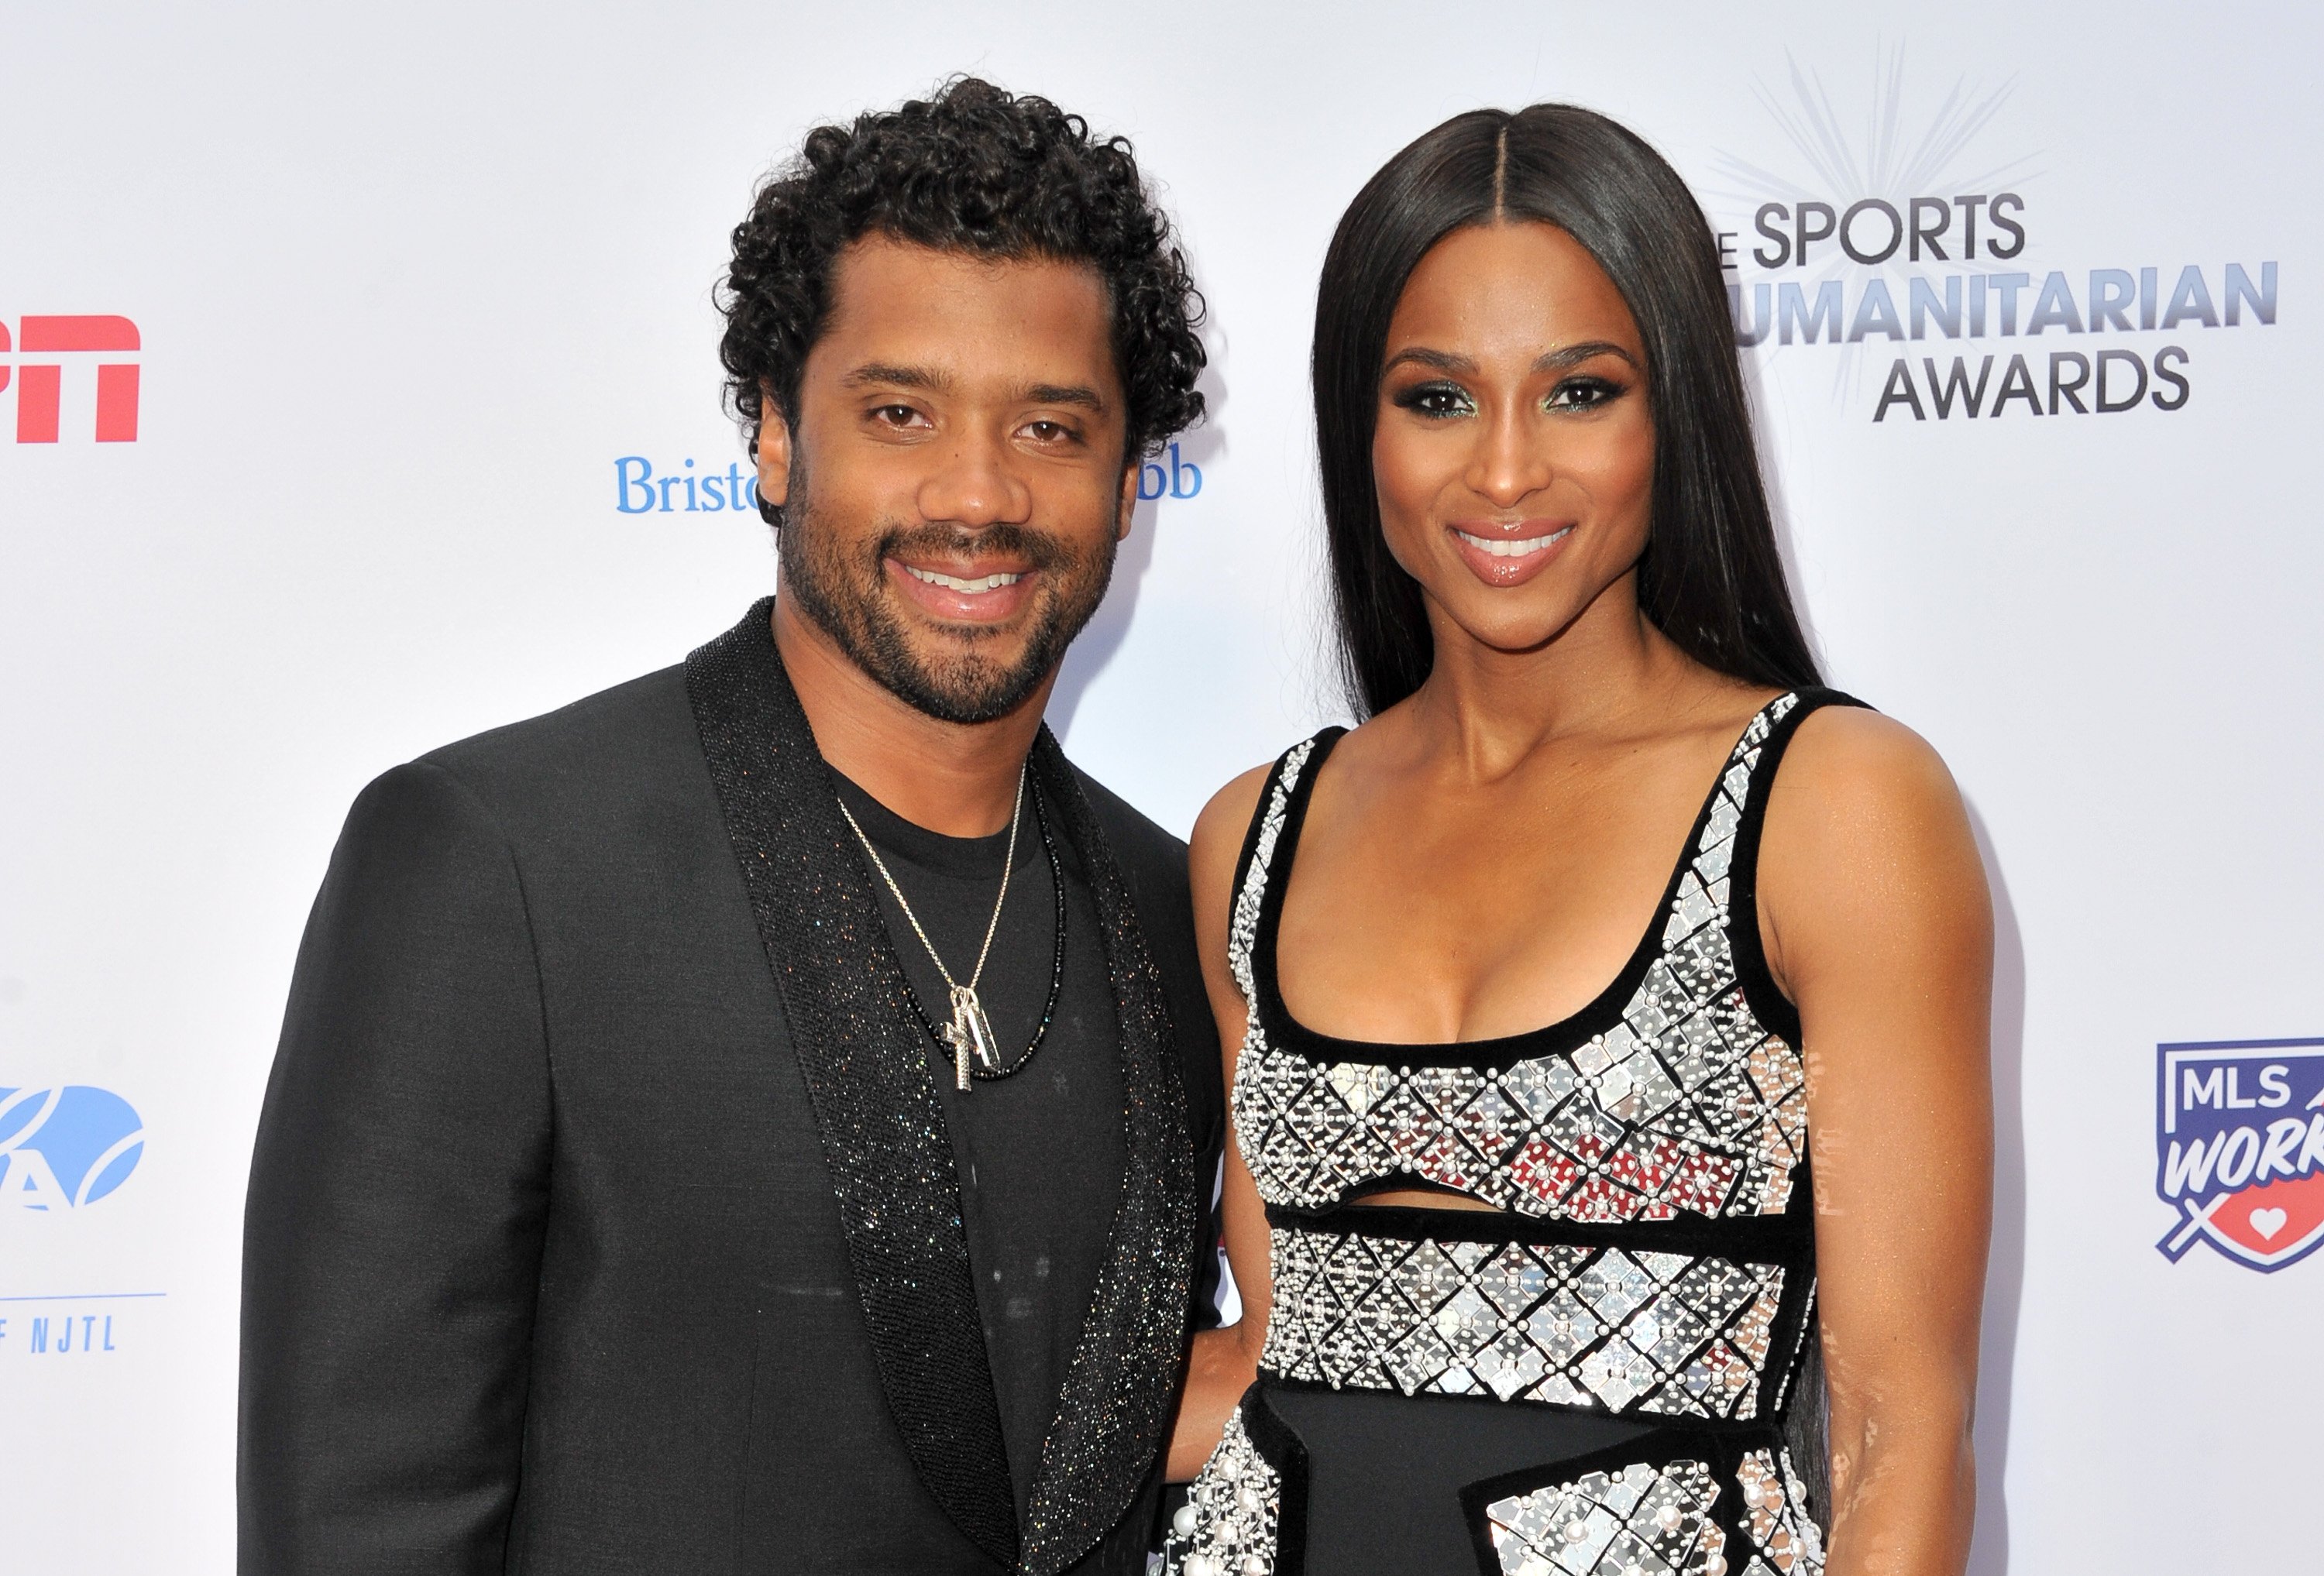 Russell Wilson and Ciara attend 5th Annual Sports Humanitarian Awards Presented by ESPN 